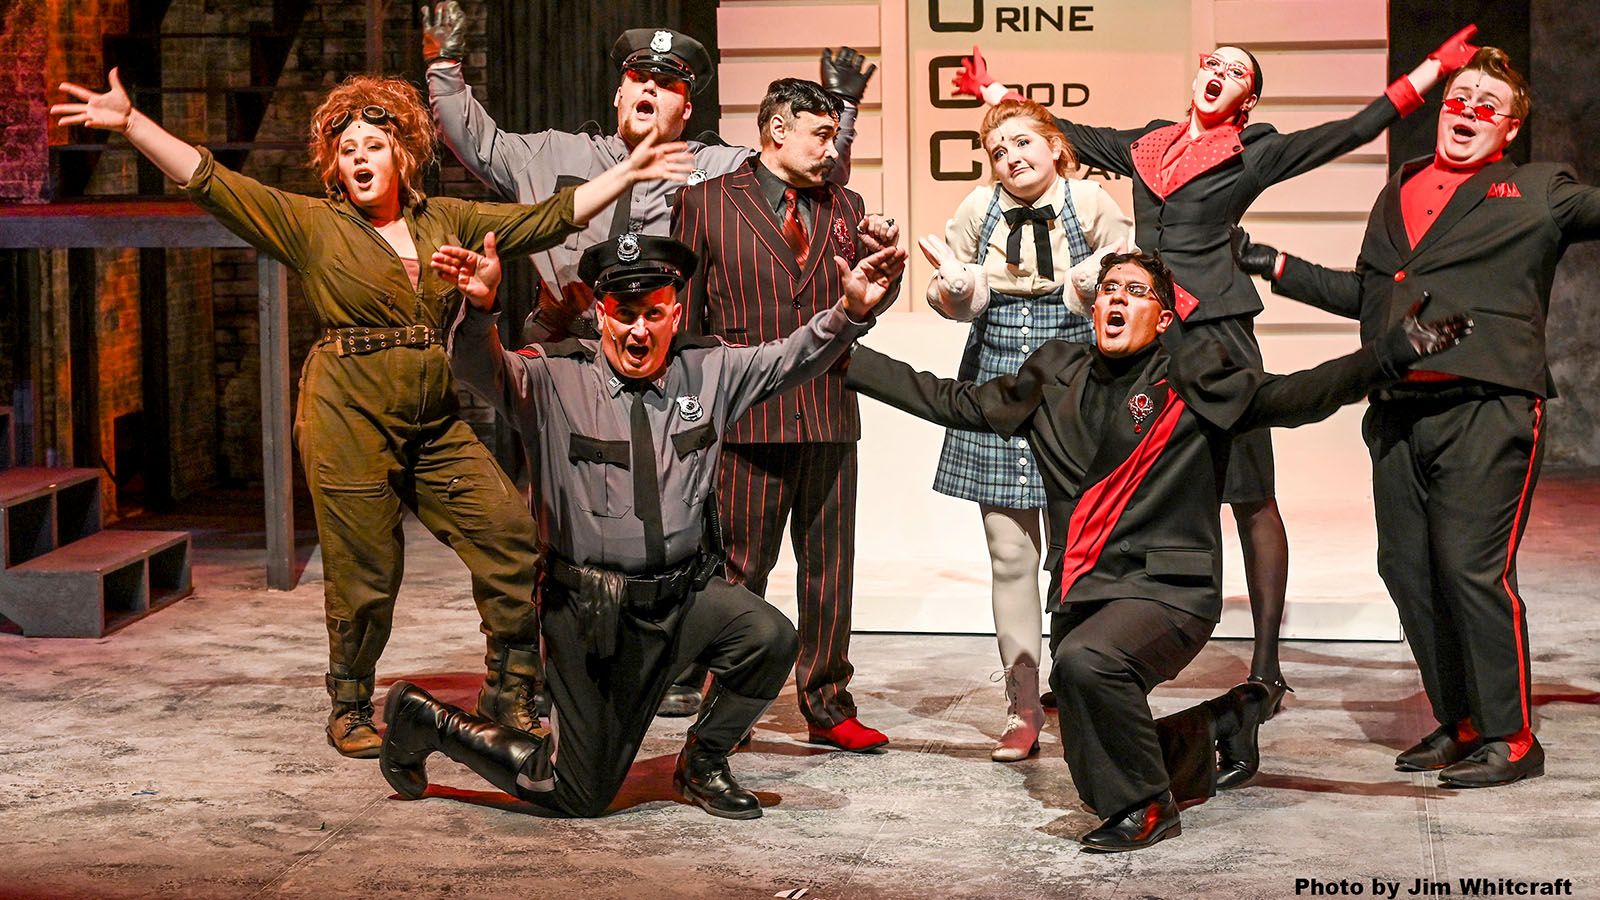 The Purdue University Fort Wayne production of Urinetown the Musical runs through Nov. 18 at Williams Theatre.